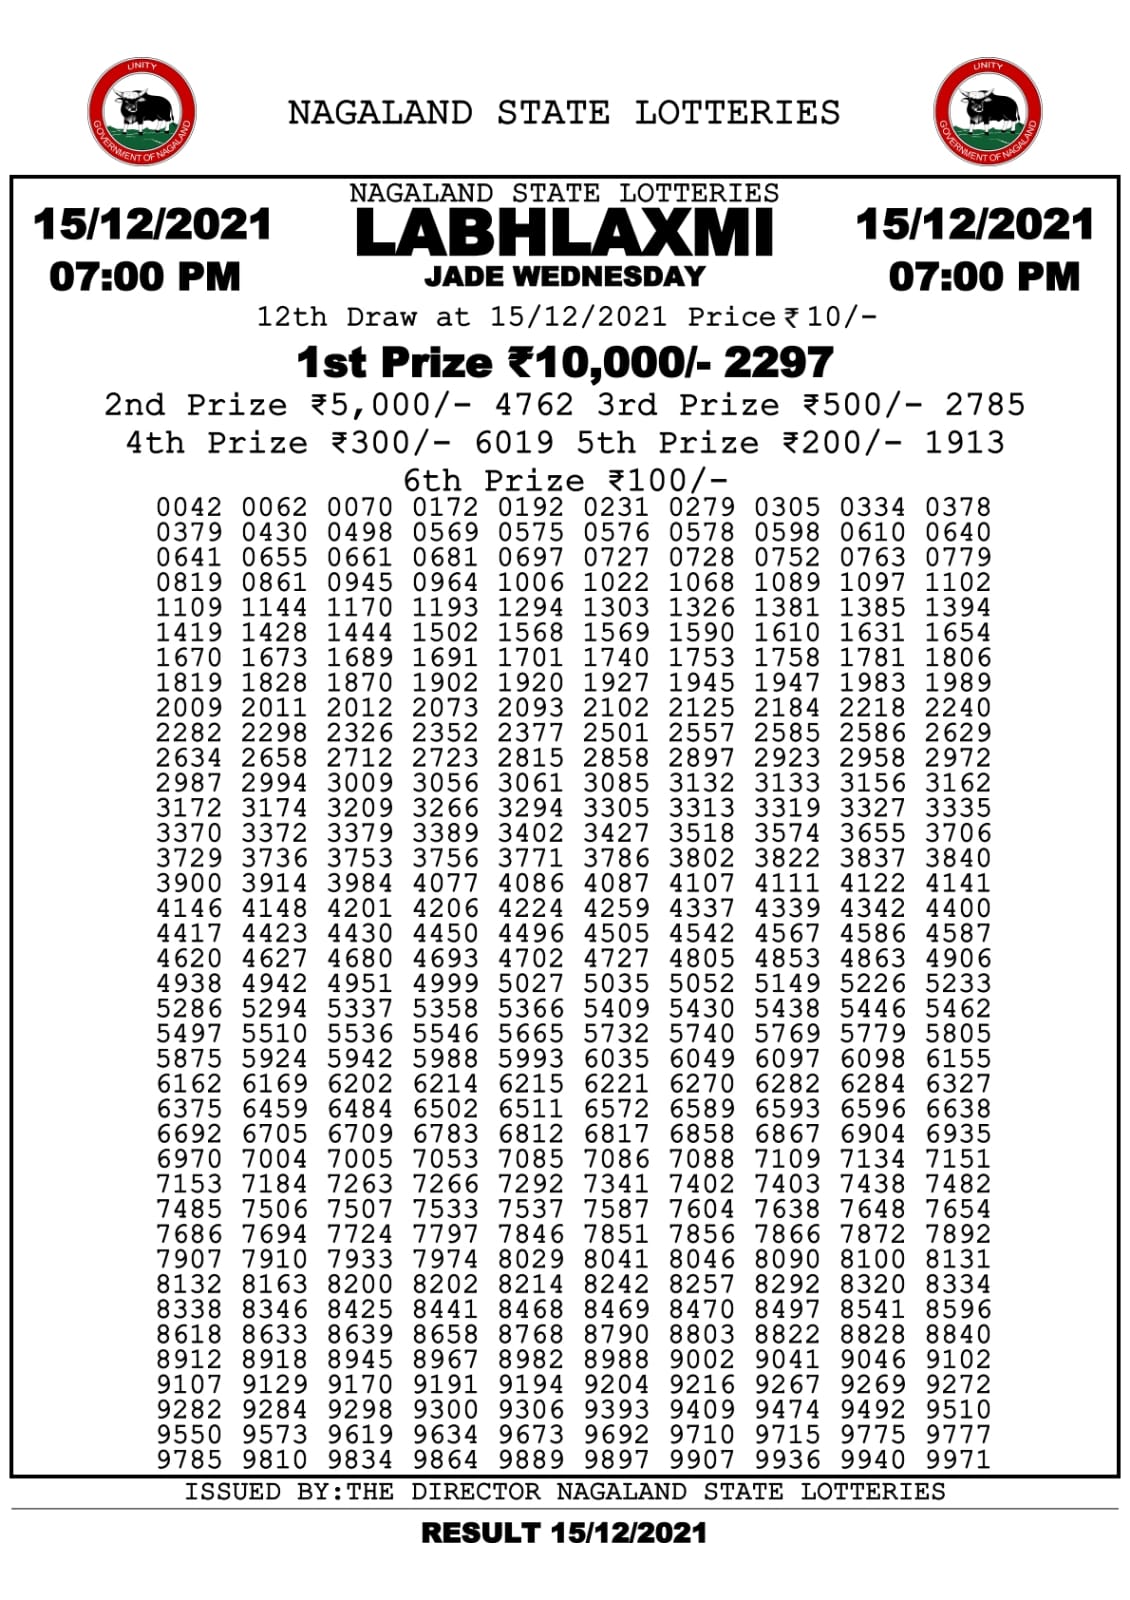 Labhlaxmi 7.00pm Lottery Result 15.12.2021